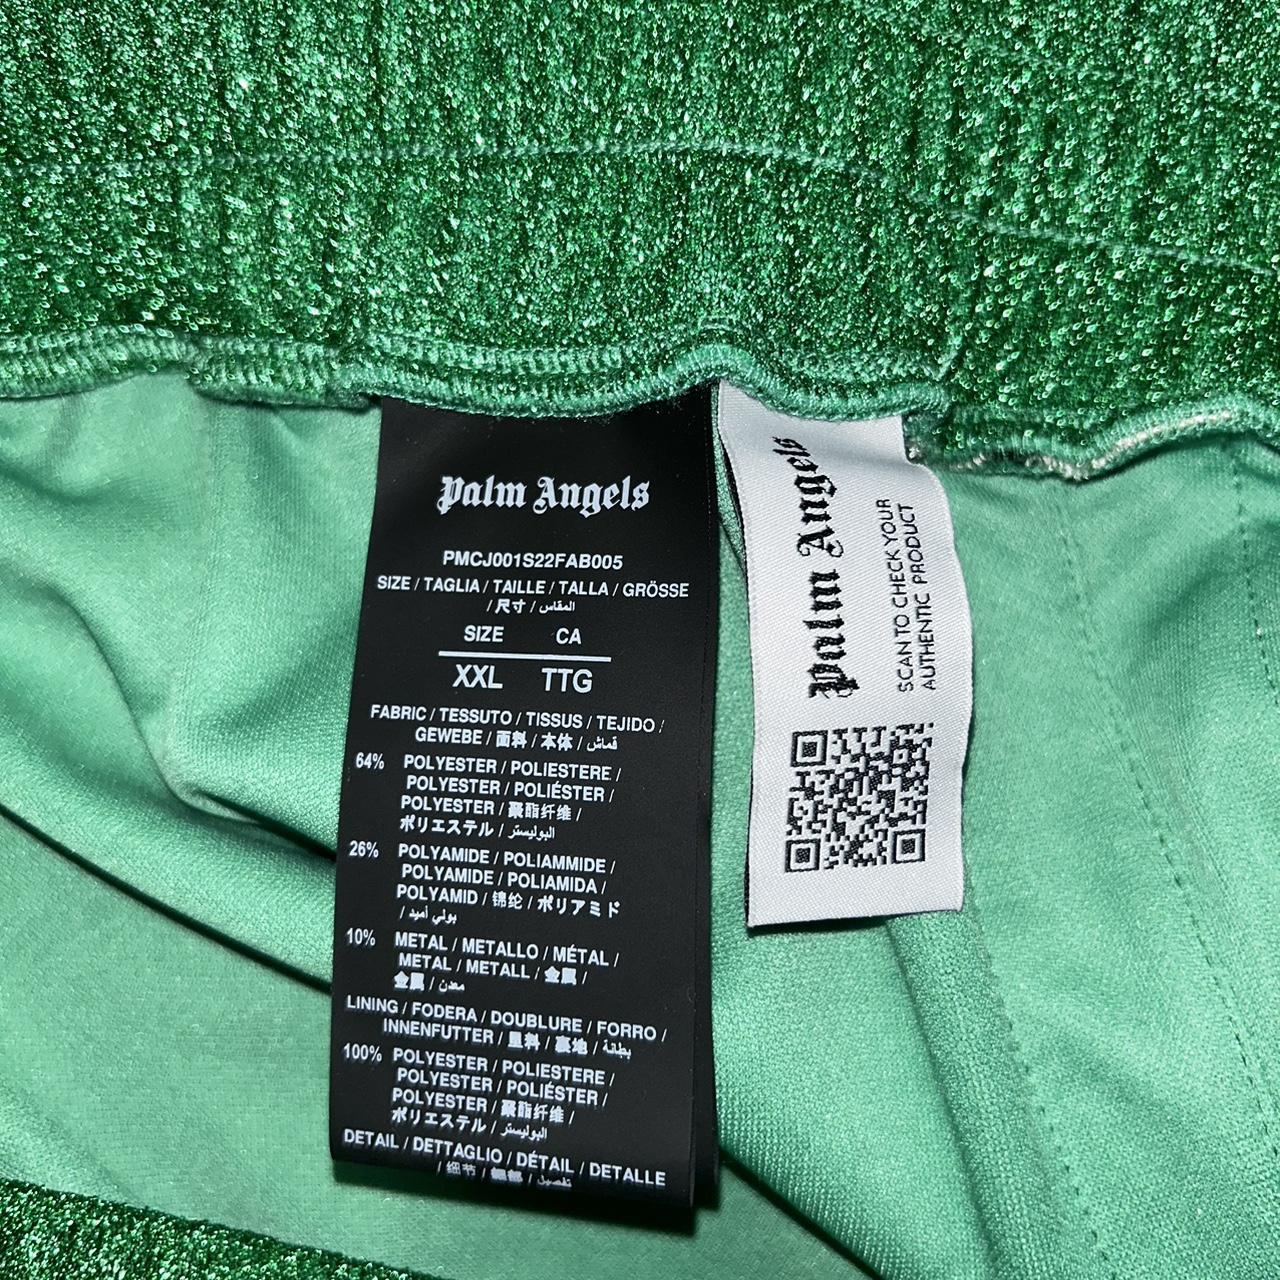 Palm Angels Women's Green Trousers (3)